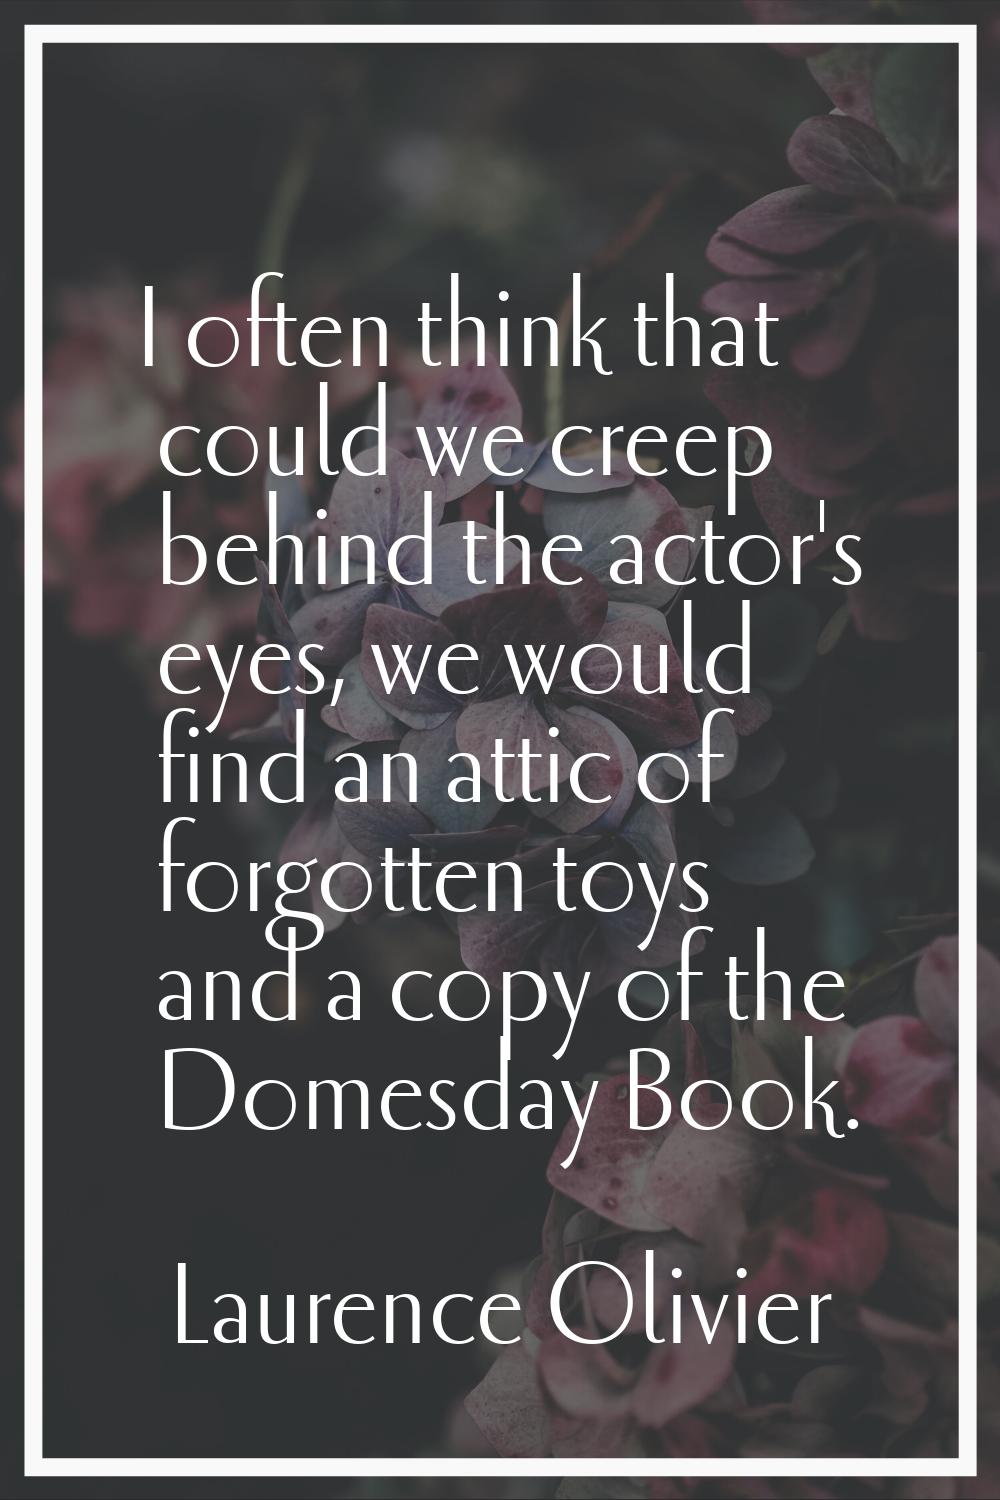 I often think that could we creep behind the actor's eyes, we would find an attic of forgotten toys